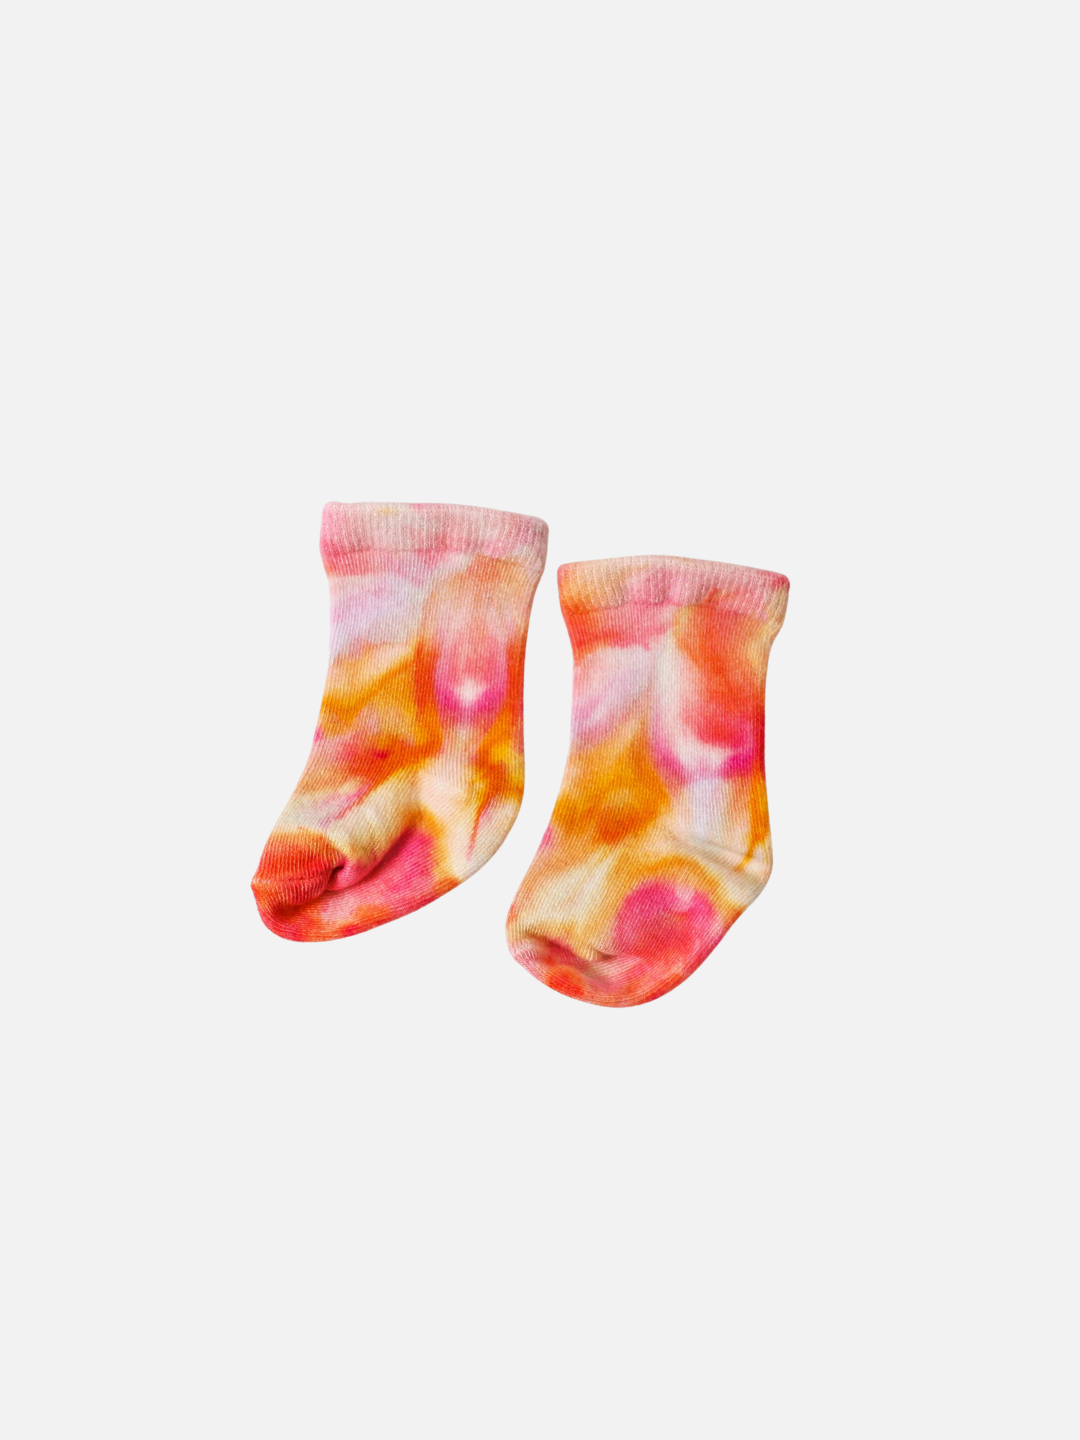 Pair of baby ankle socks in dappled shades of orange, pink and white